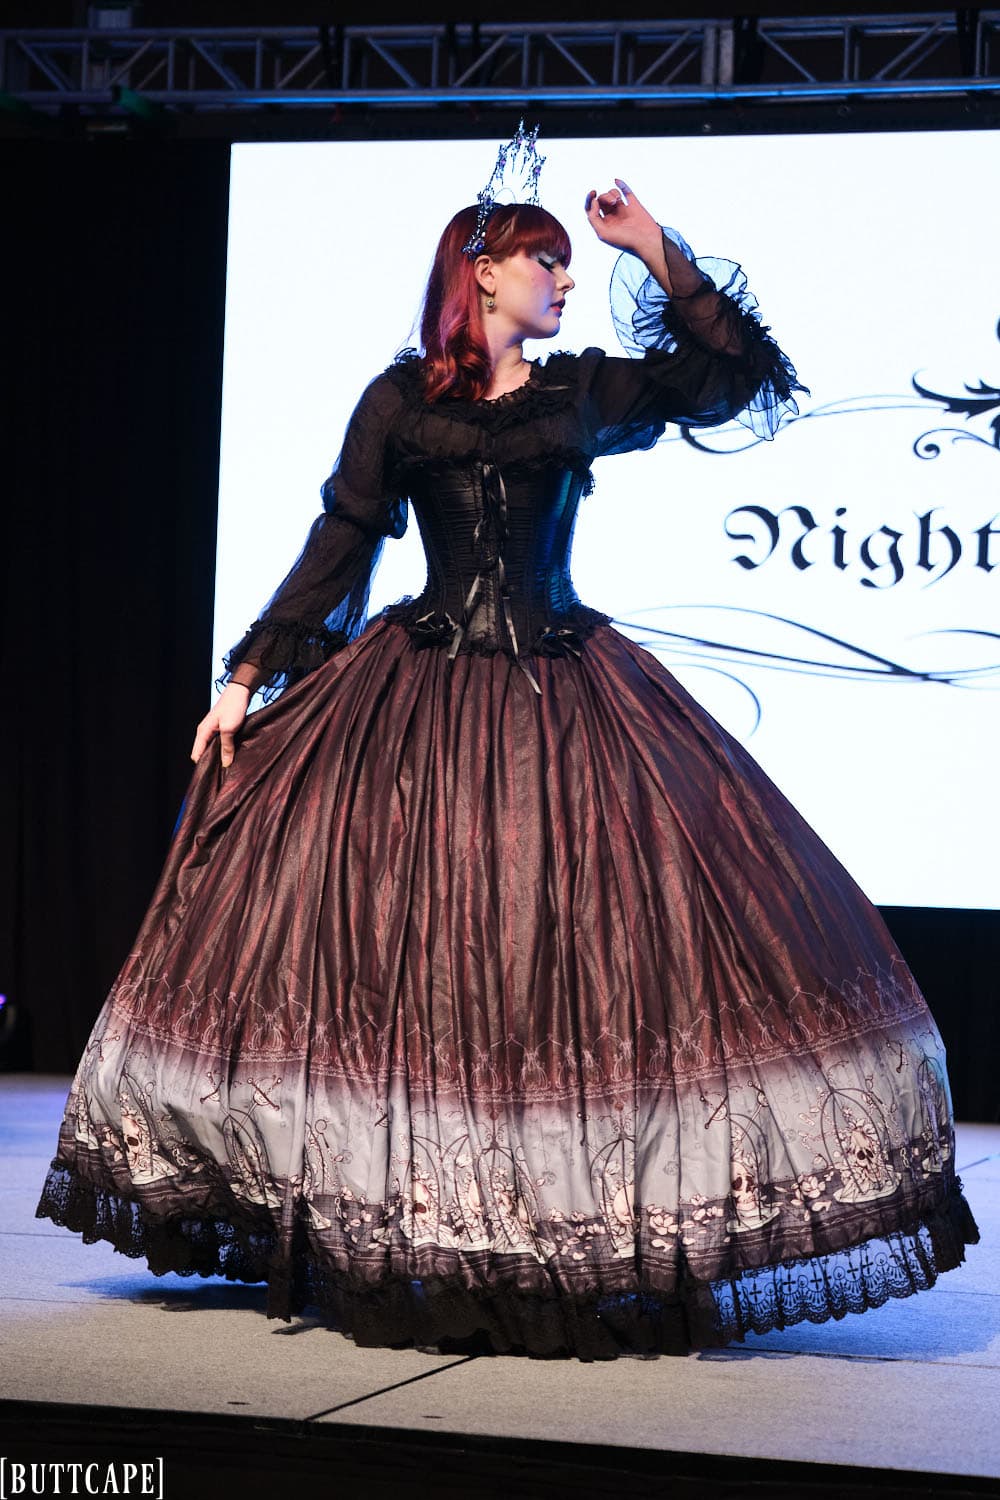 gothic model wearing floor length gown posing with arm up and holding skirt out.